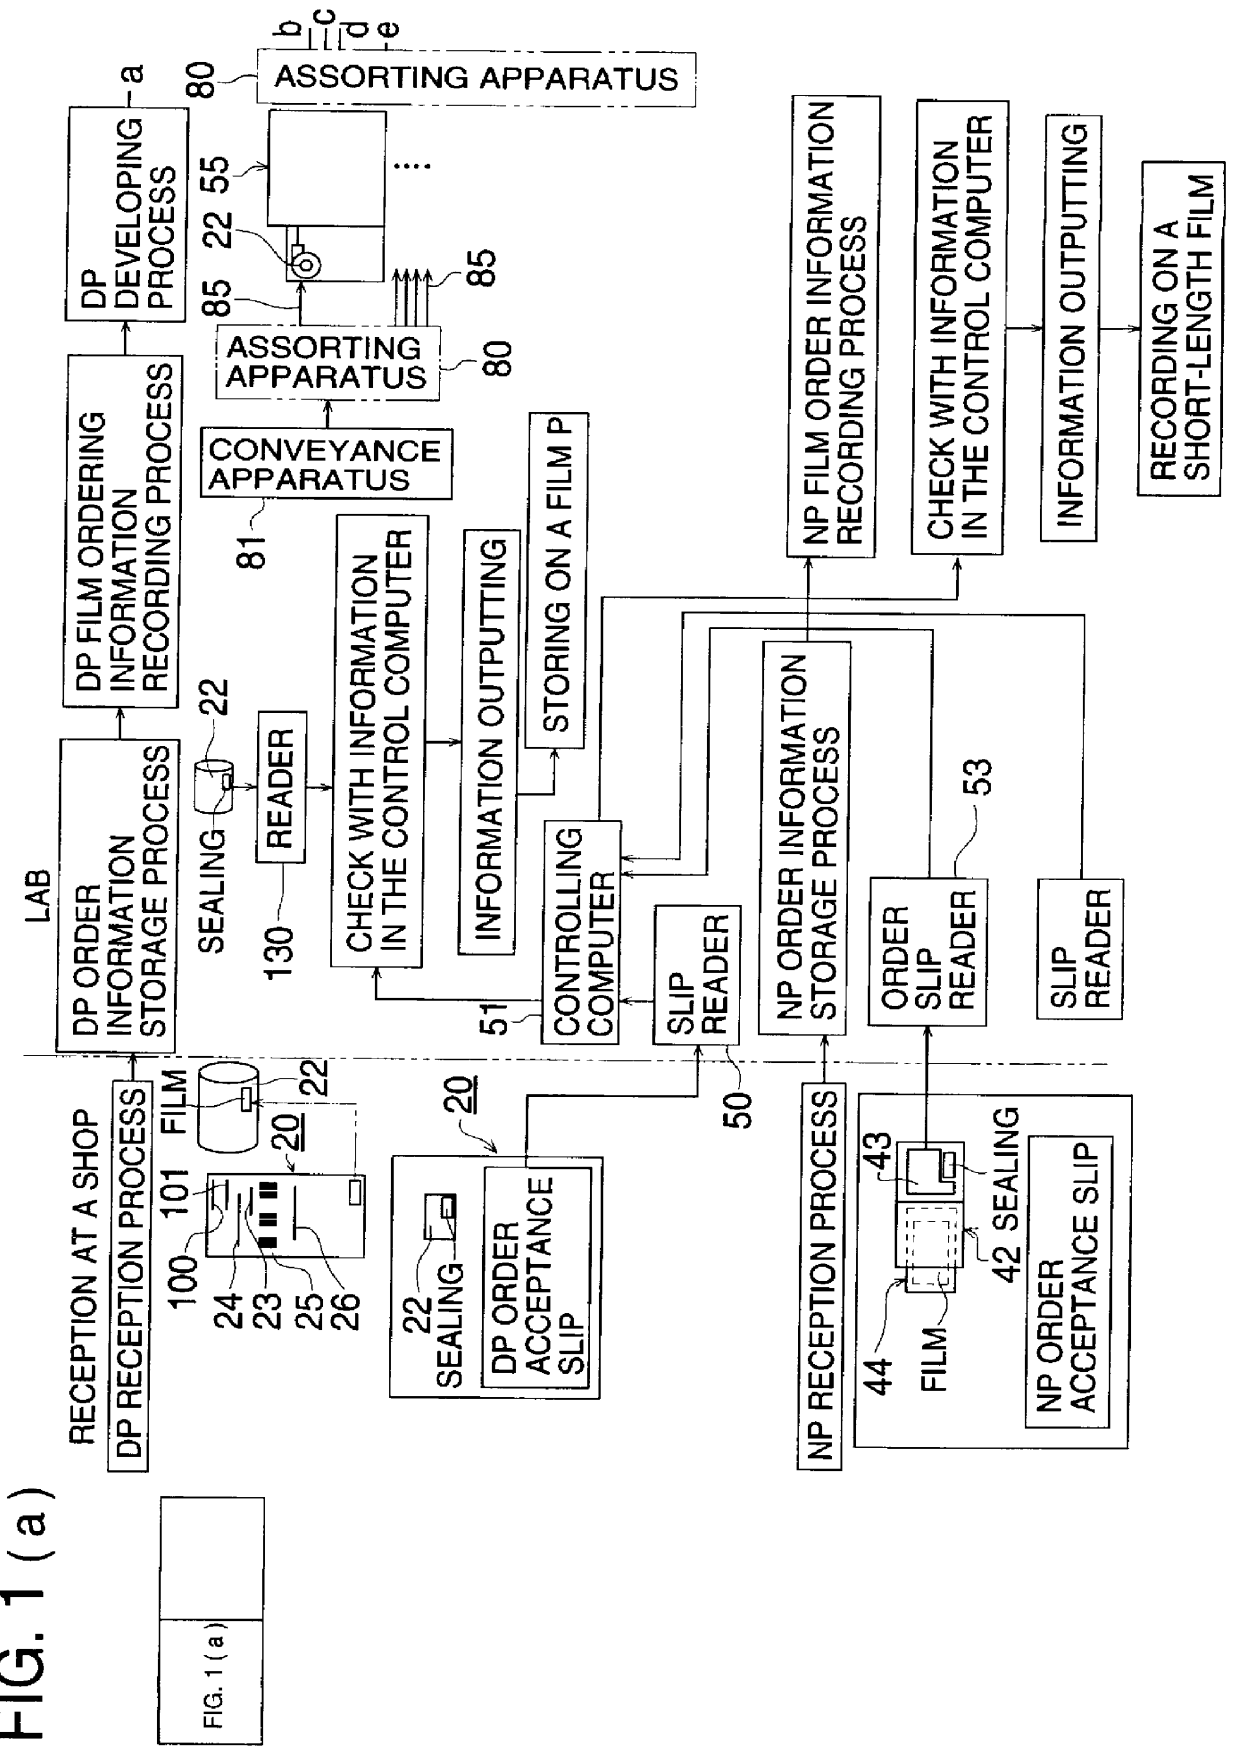 Photographic processing system